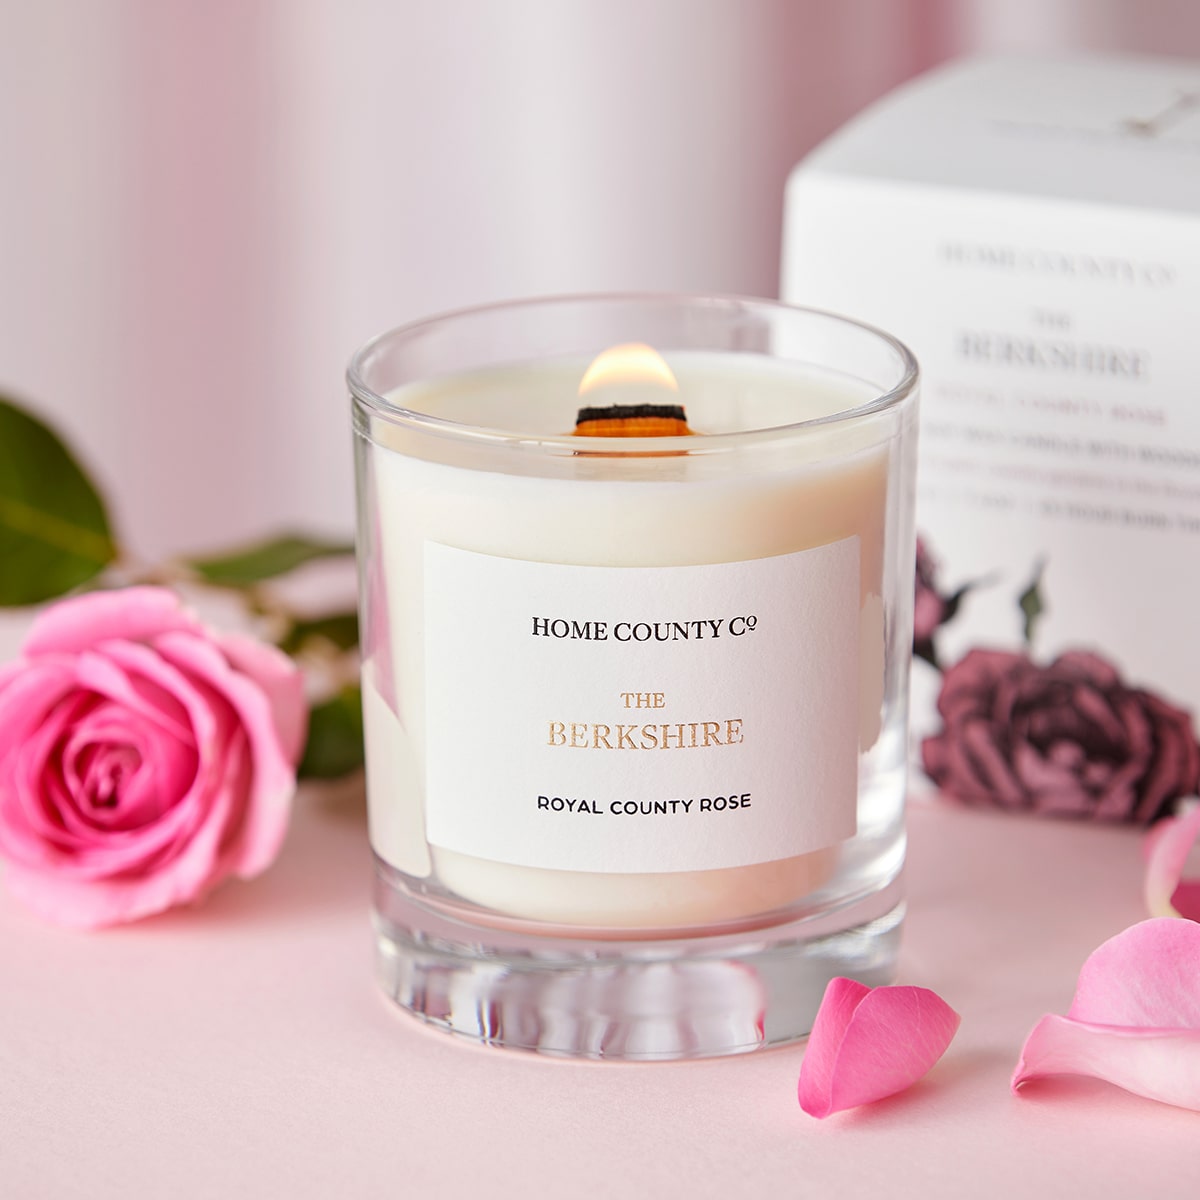 Home County Co. Berkshire rose scented candle shown with pink rose and candle packaging